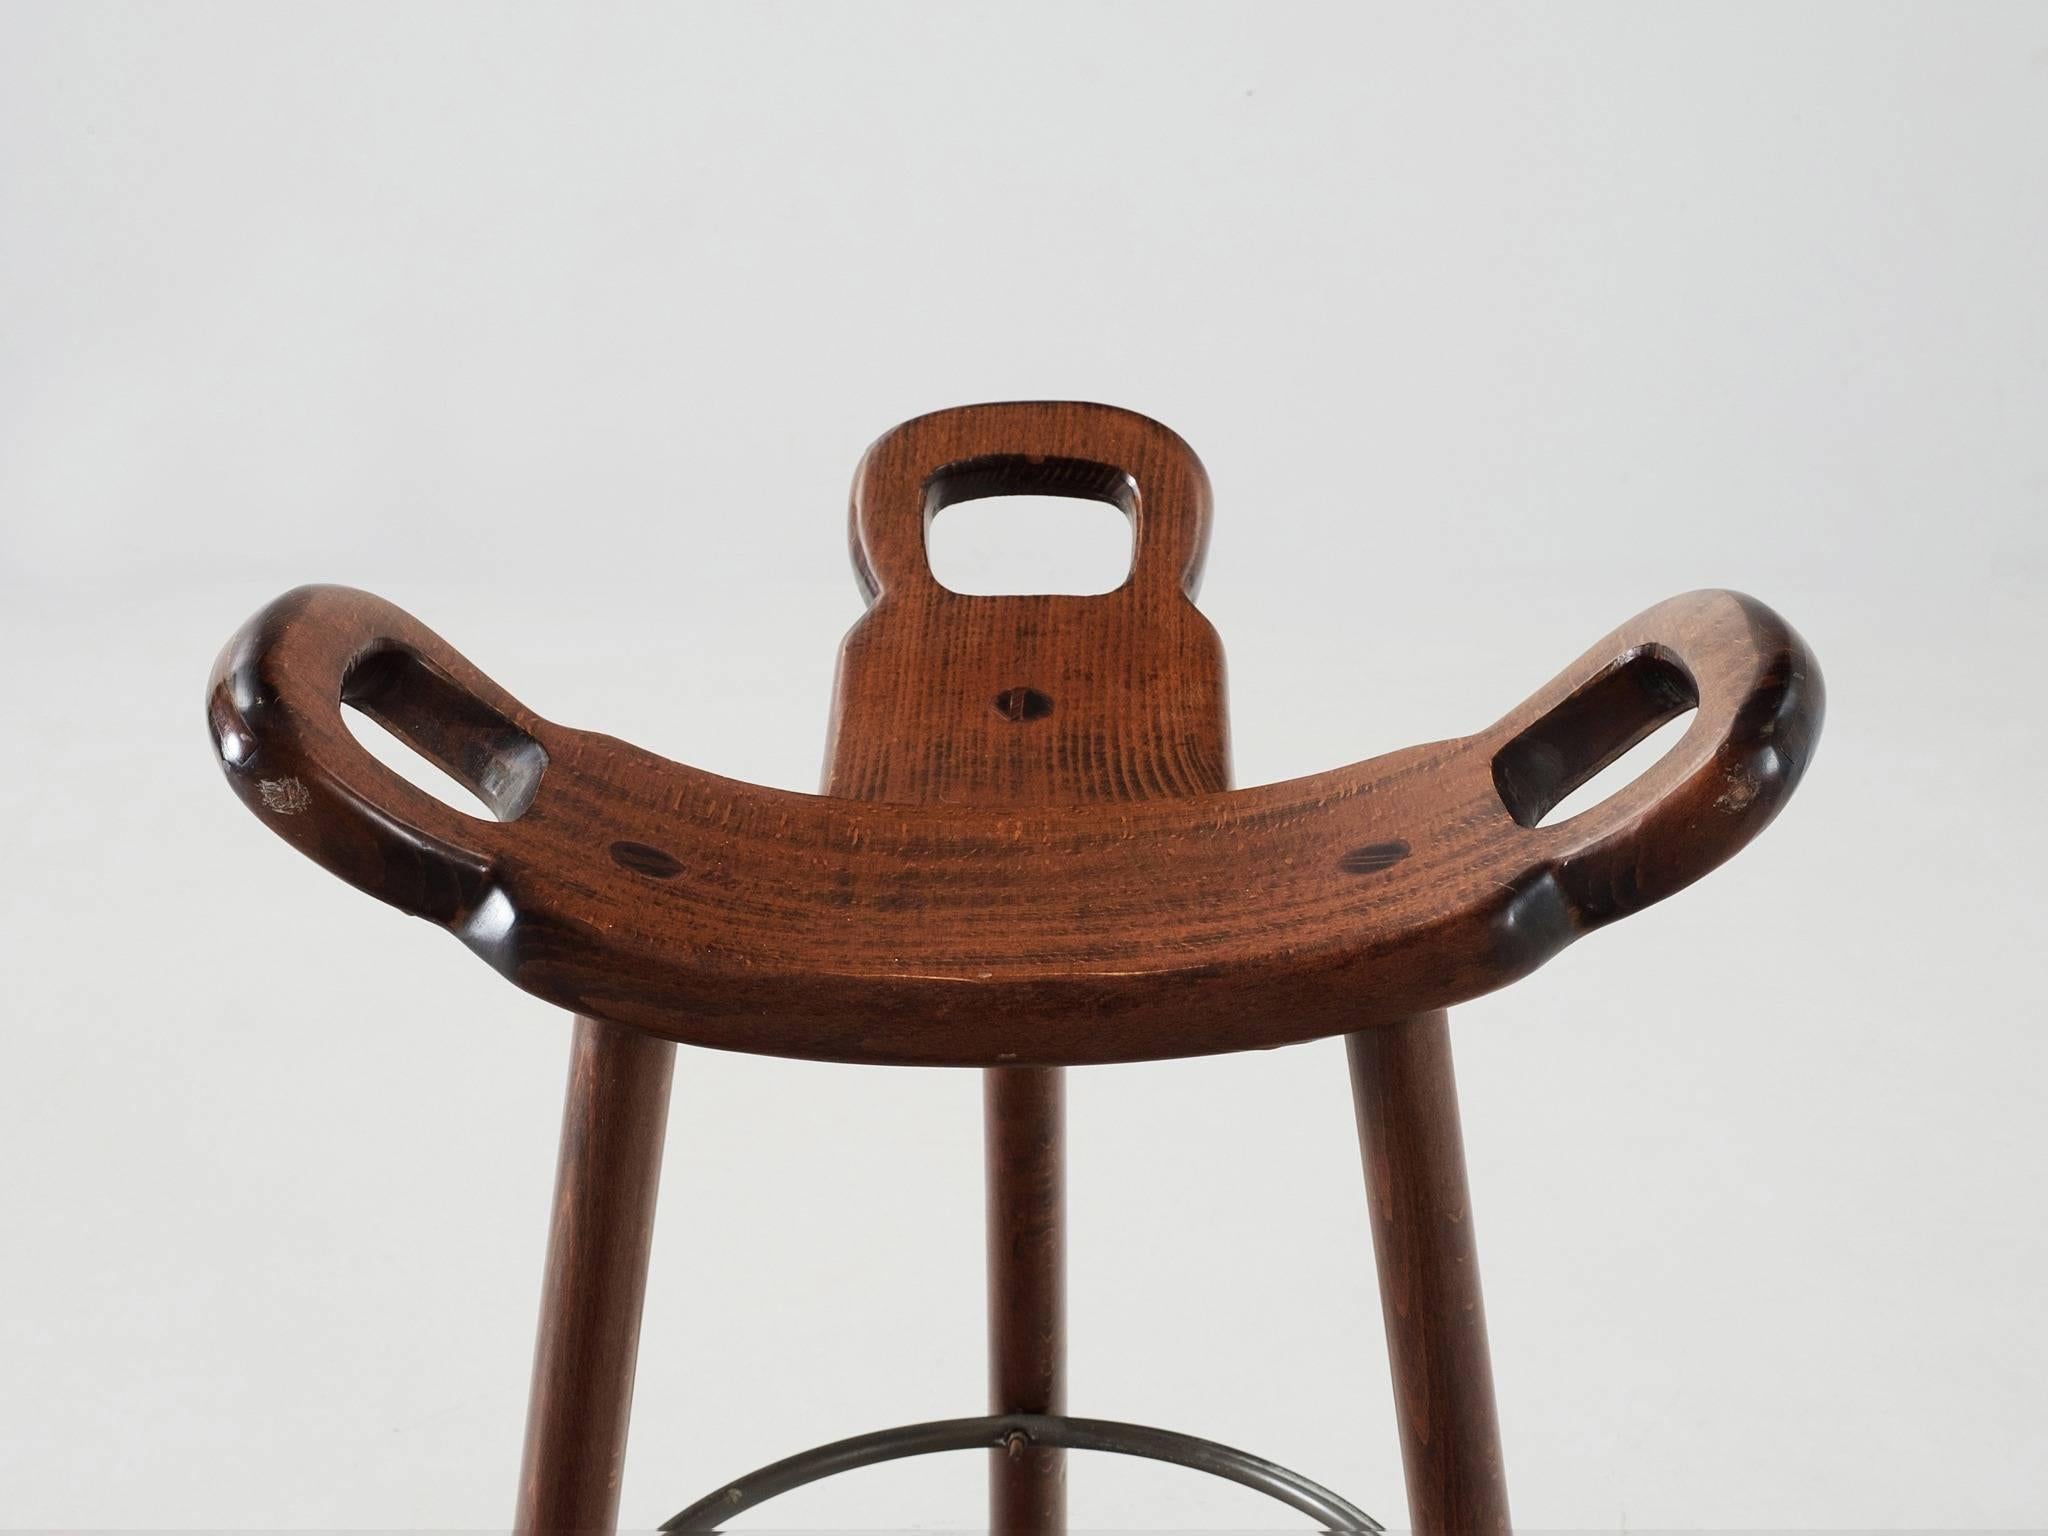 Set of eight 'Brutalist' or 'Marbella' bar stools, in stained beech and metal, Spain 1970s. 

Set of eight Brutalist bar stools in dark-brown stained beech. The eye-catching part is the seating. A curved T-shape with three handles. The handles are